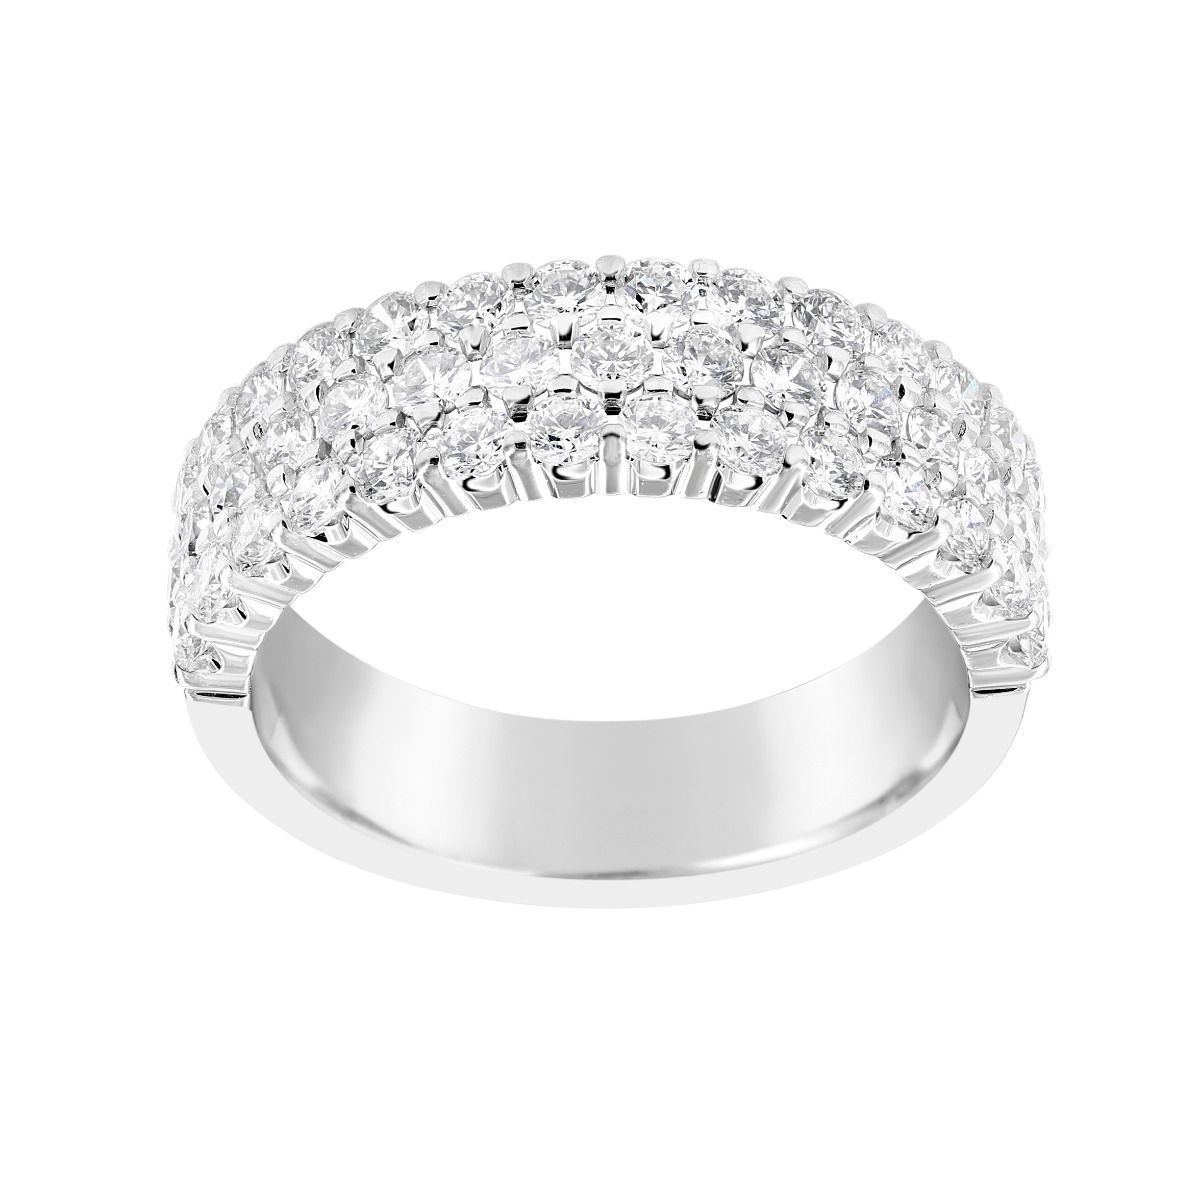 Twolondon 14k White Gold Three Row Diamond Anniversary Band For Newest Diamond Three Row Anniversary Bands In Gold (View 5 of 25)